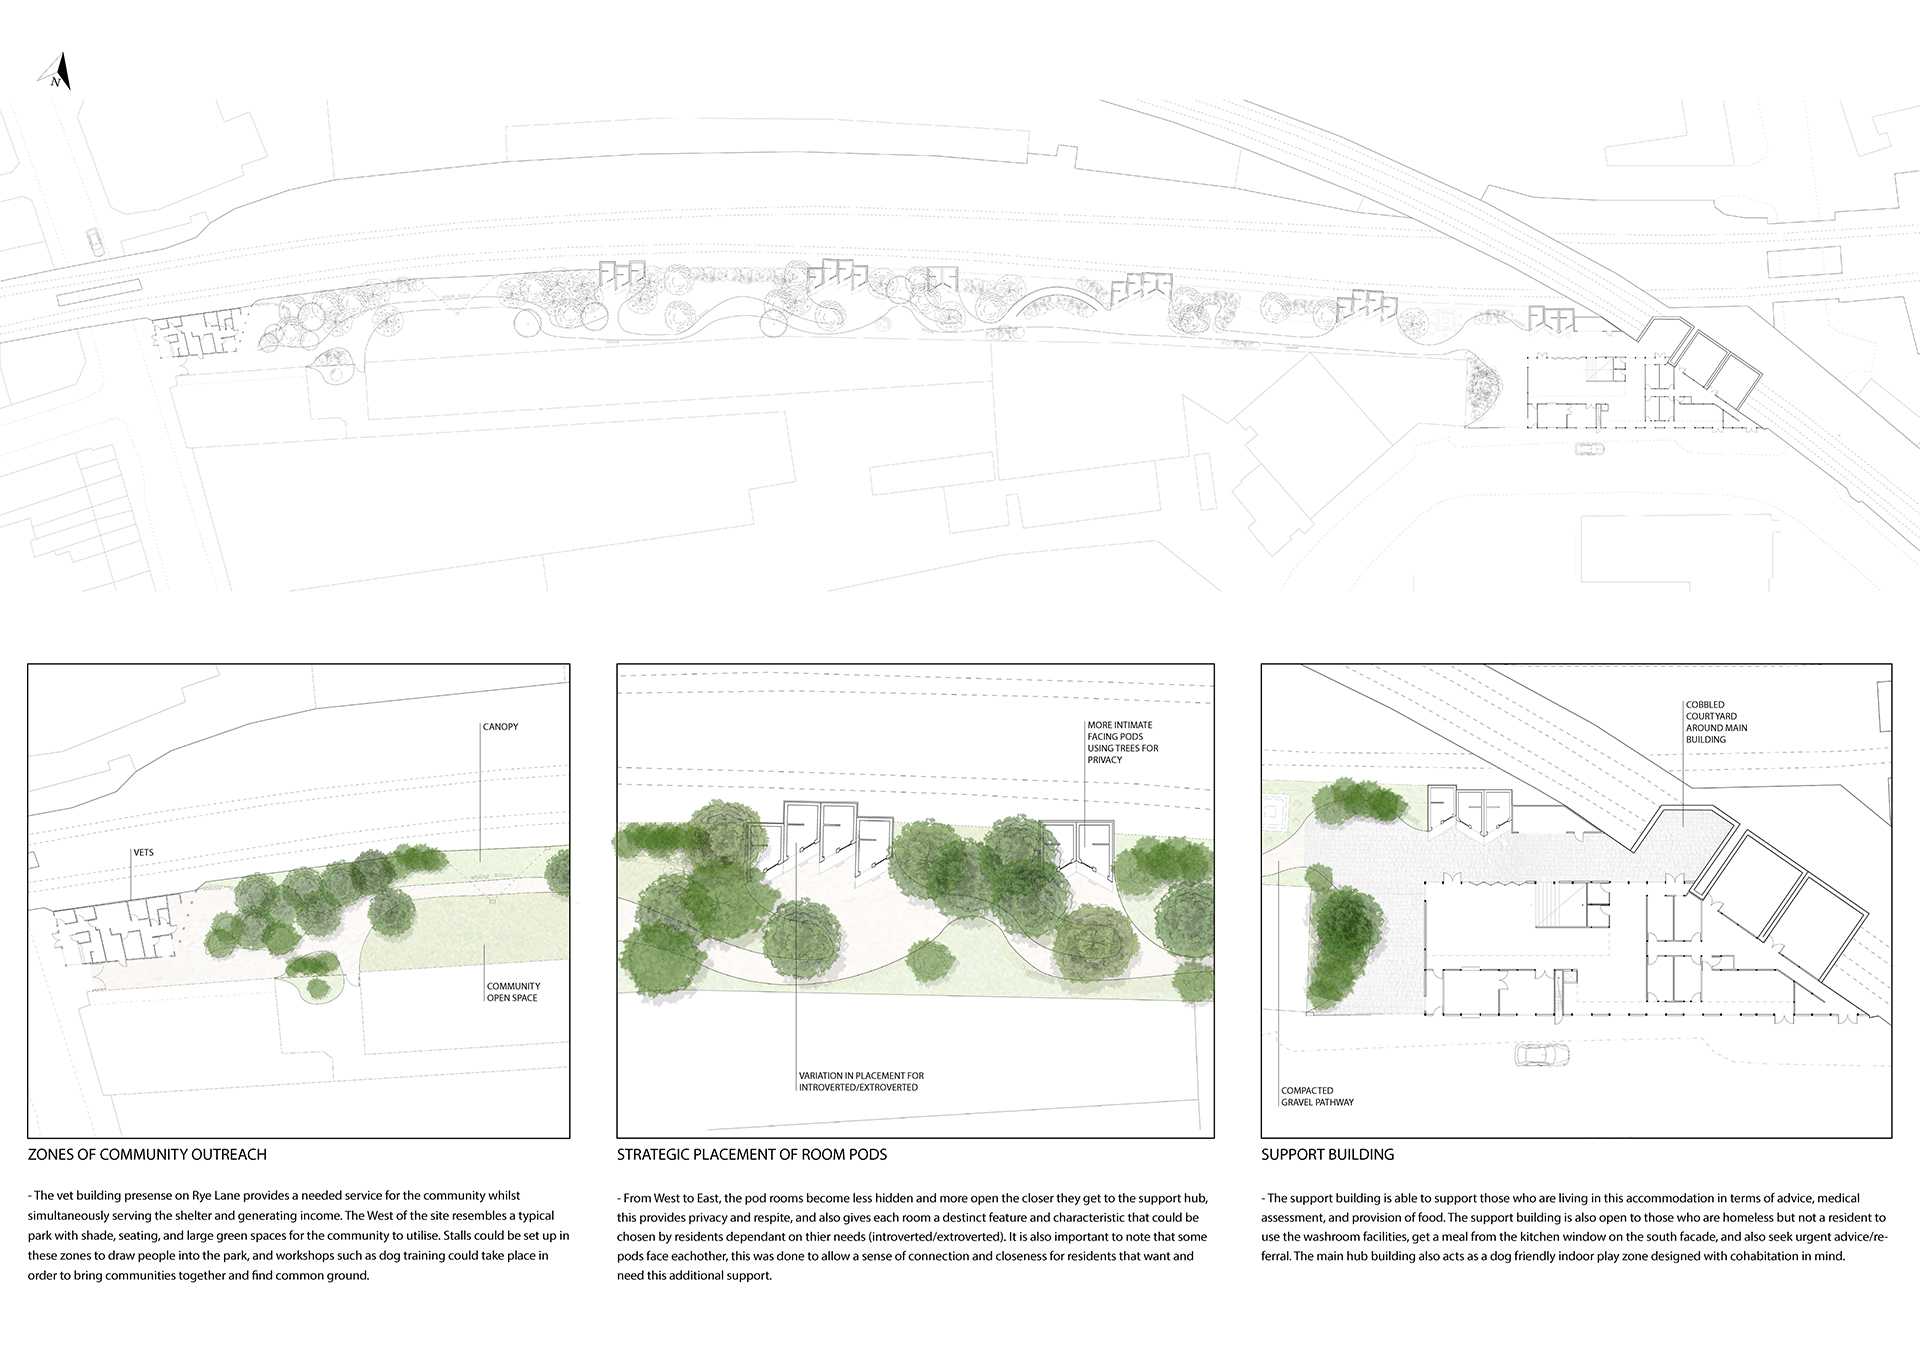 Master-plan overview of the whole proposal. The animal clinic can be seen at the west end on Rye Lane, whilst the room pods are seen scattered across this long urban site. The main hub building at the east end creates a safe space for the users and also provides support for others who are homeless.